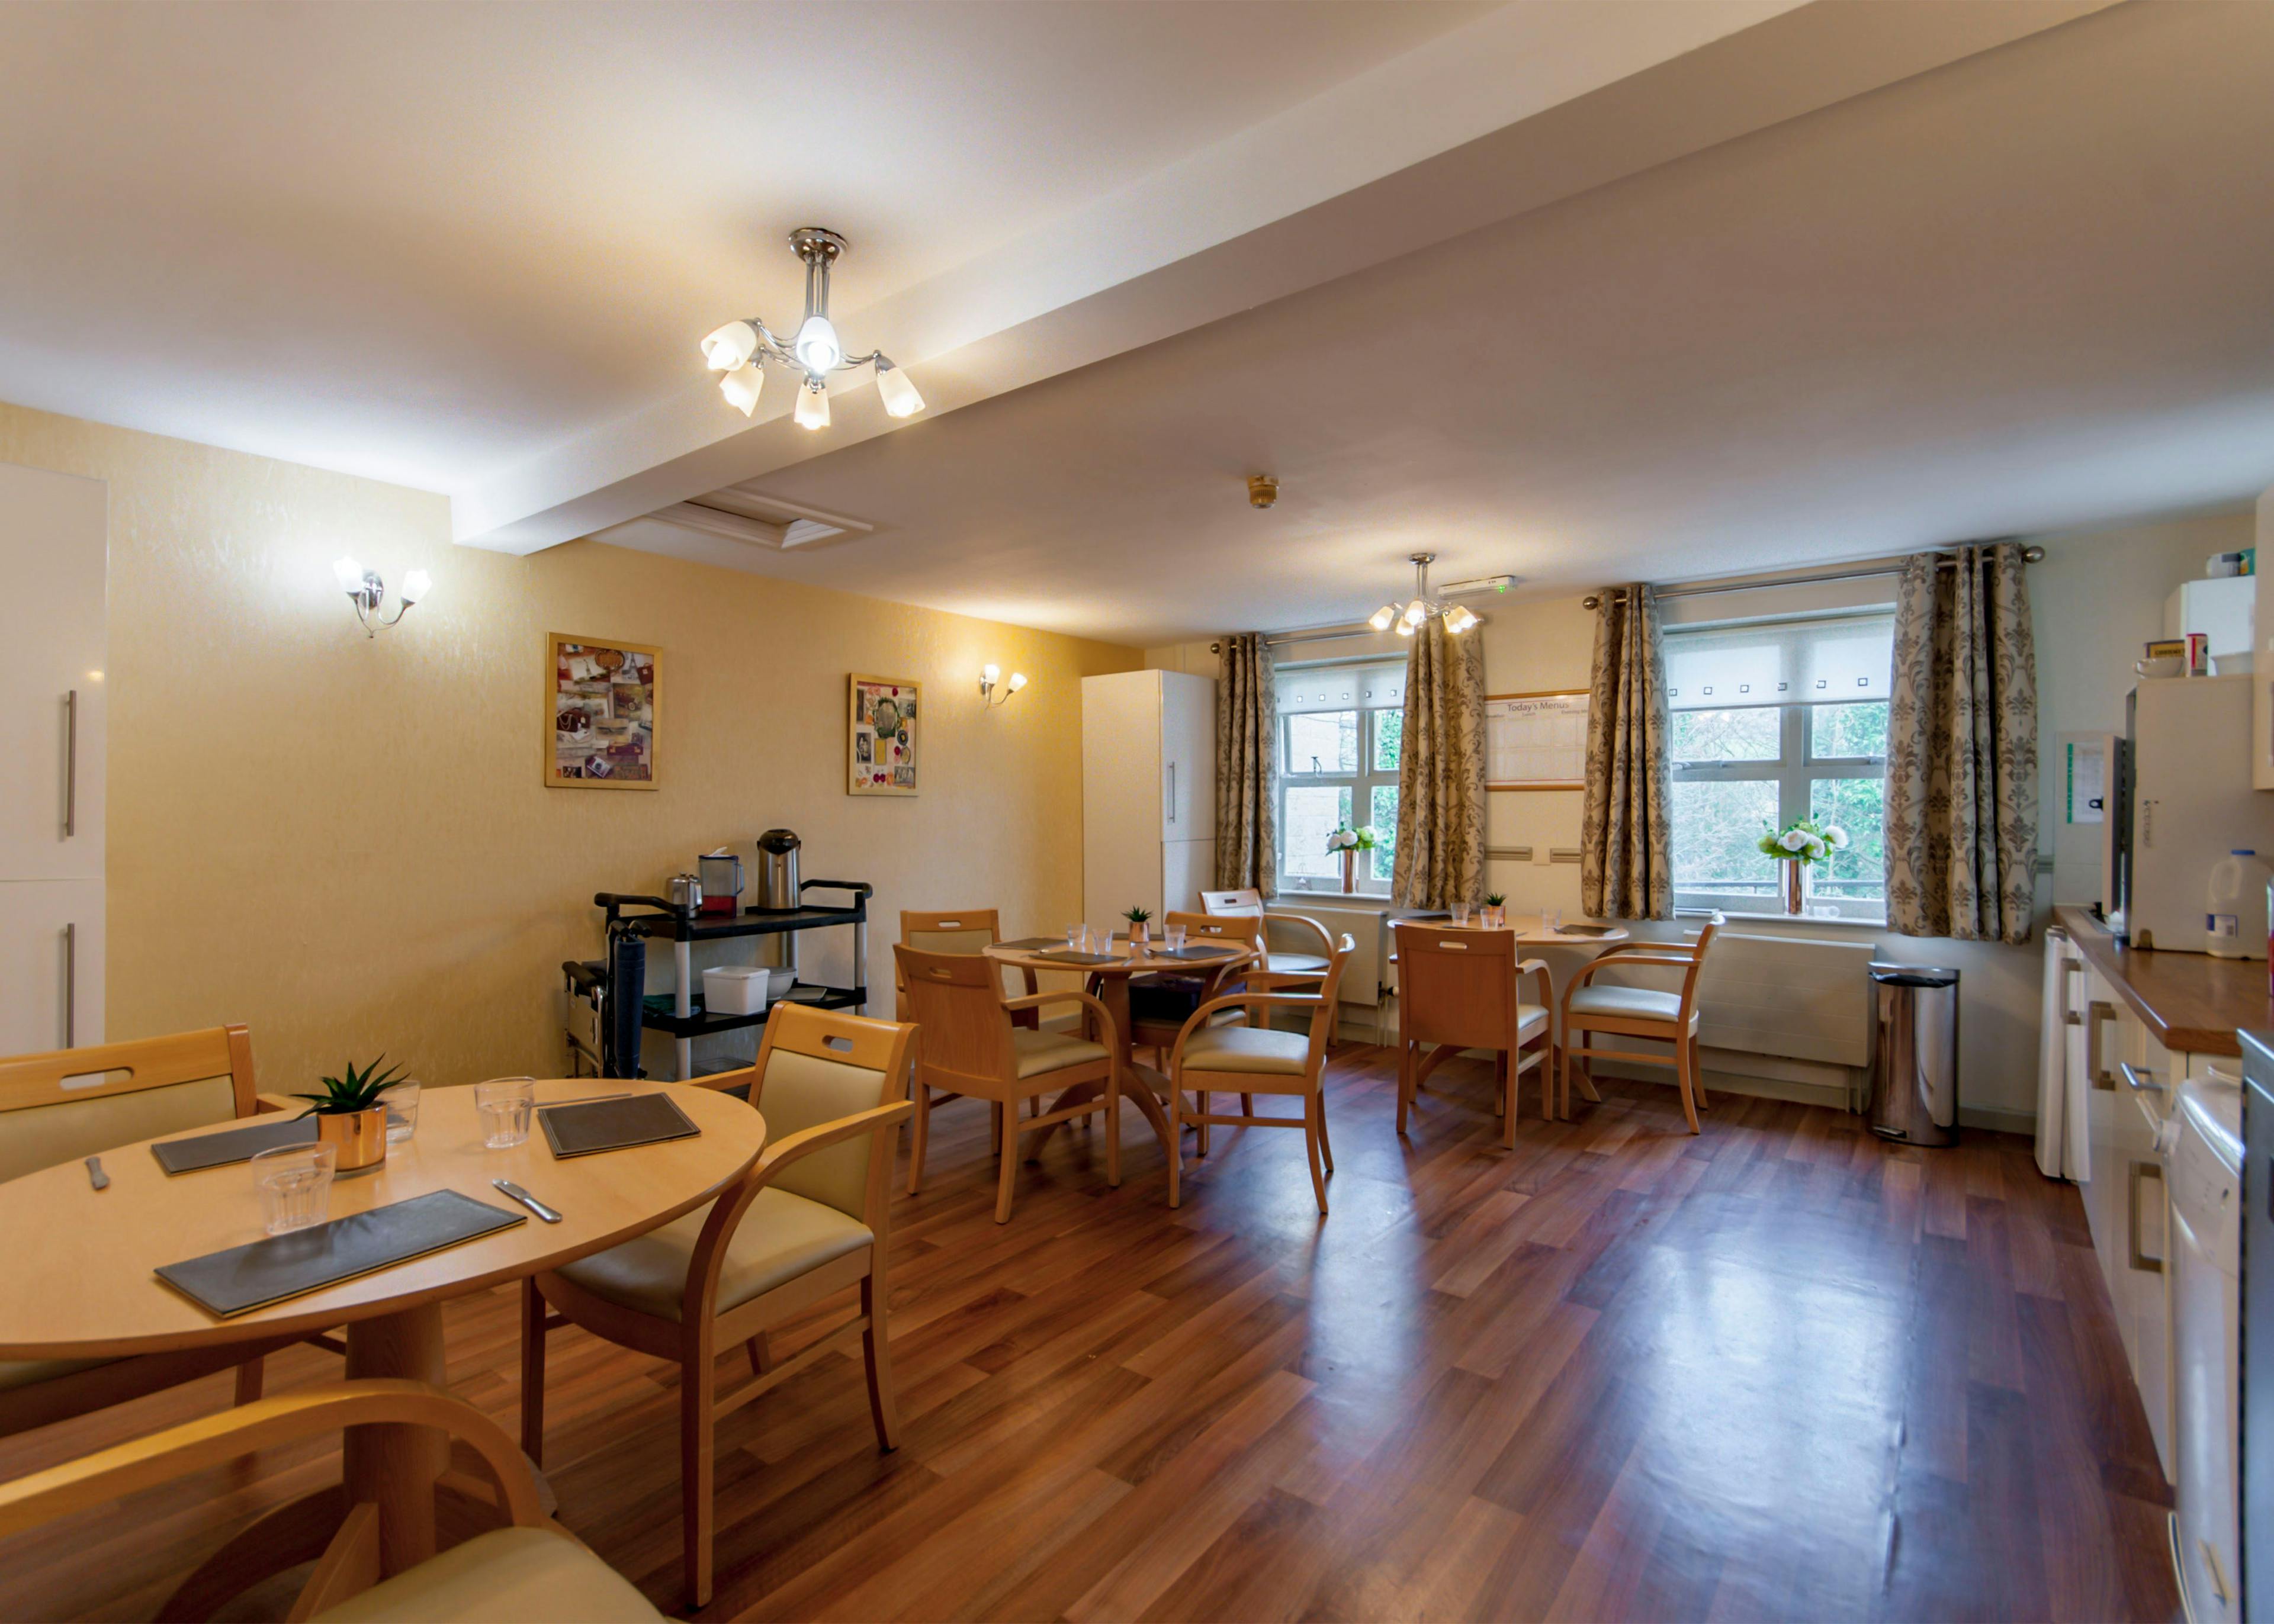 The dining area in the Belmont House Care Home in Sheffield